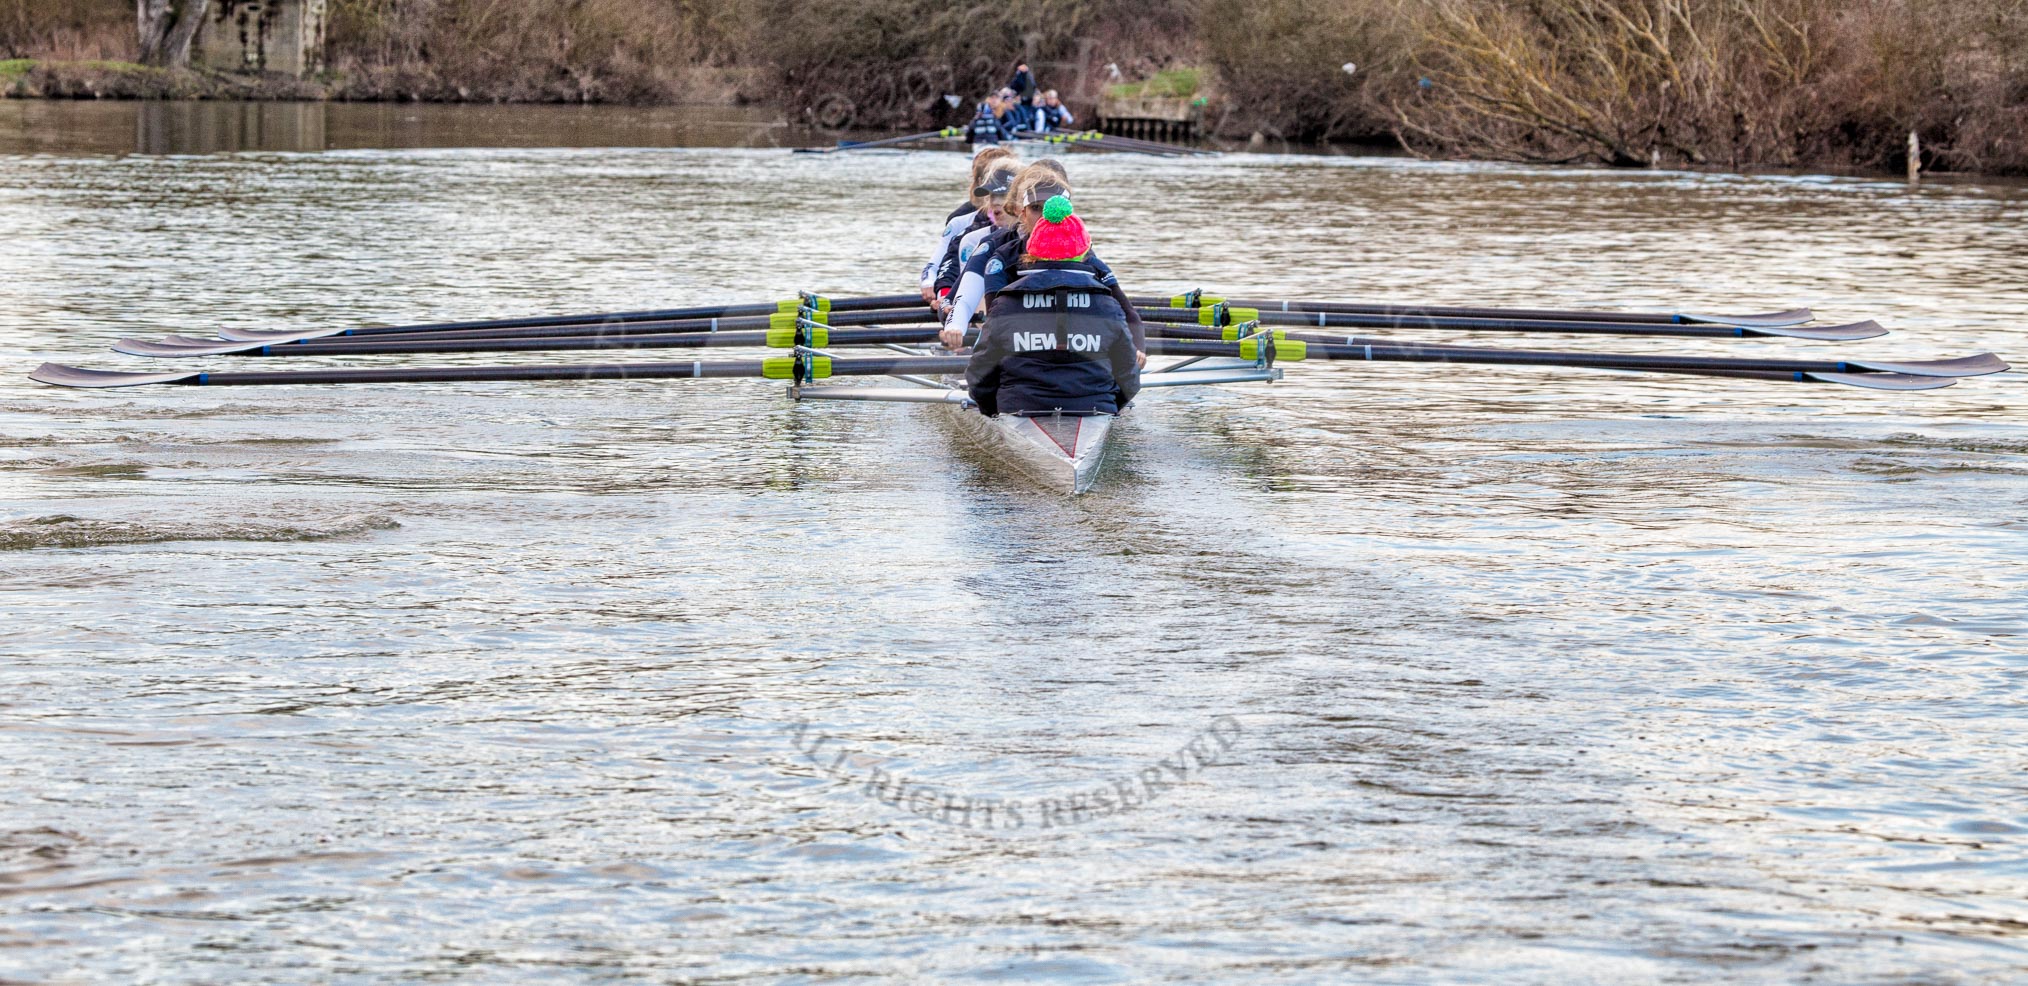 The Boat Race season 2013 - OUWBC training: The OUWBC Blue Boat during the training session - bow Mariann Novak, Alice Carrington-Windo, Mary Foord-Weston, Jo Lee, Amy Varney, Harriet Keane, Anastasia Chitty, stroke Maxie Scheske, and cox Katie Apfelbaum..
River Thames,
Wallingford,
Oxfordshire,
United Kingdom,
on 13 March 2013 at 17:10, image #91